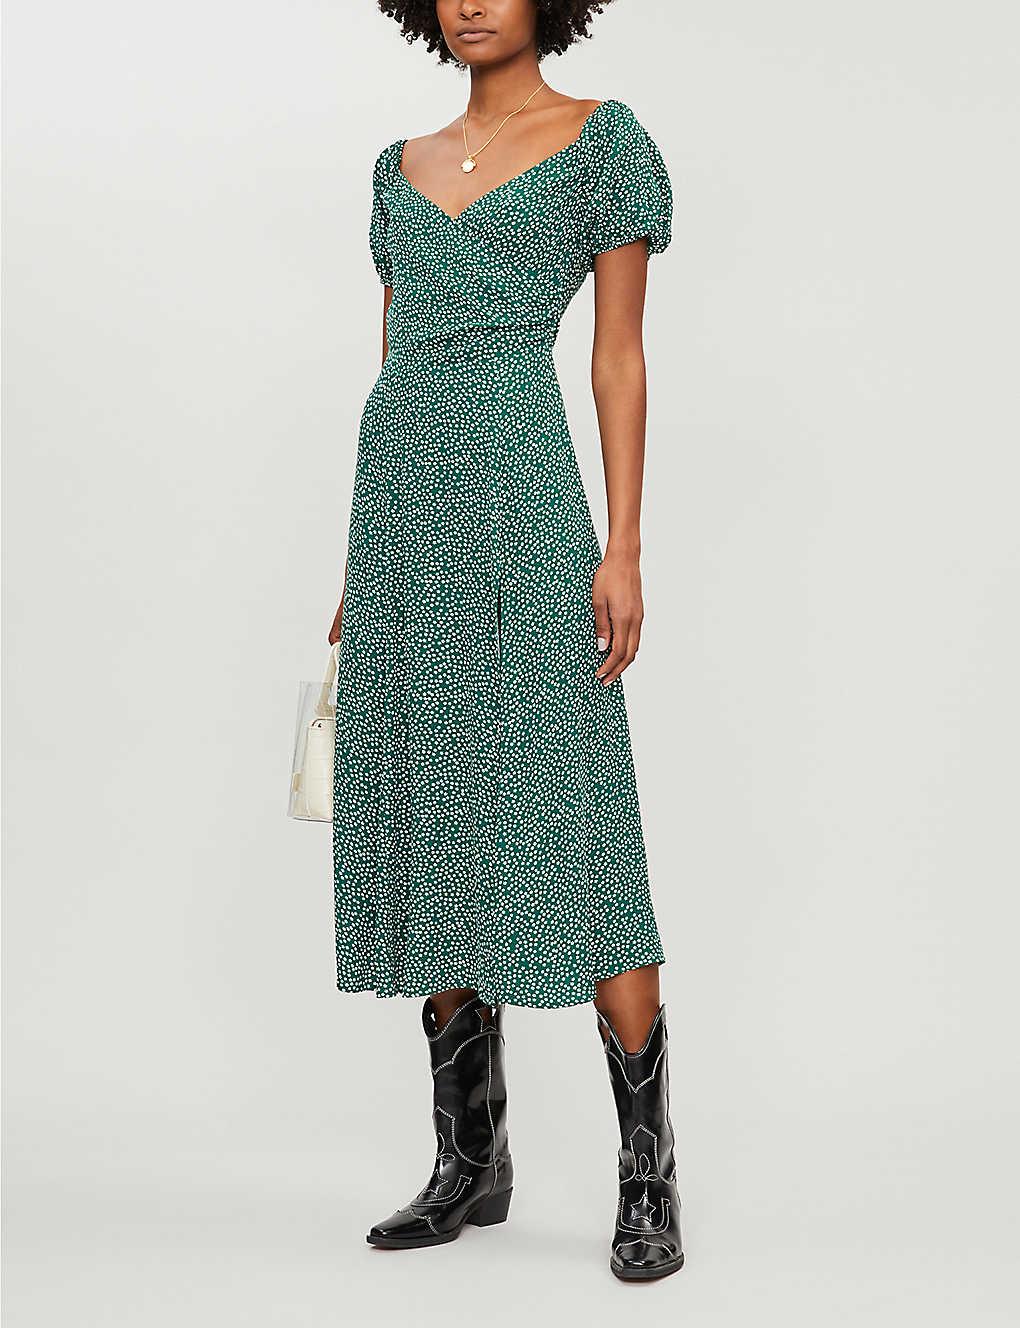 Reformation Pearl Floral-print Crepe Midi Dress in Green | Lyst